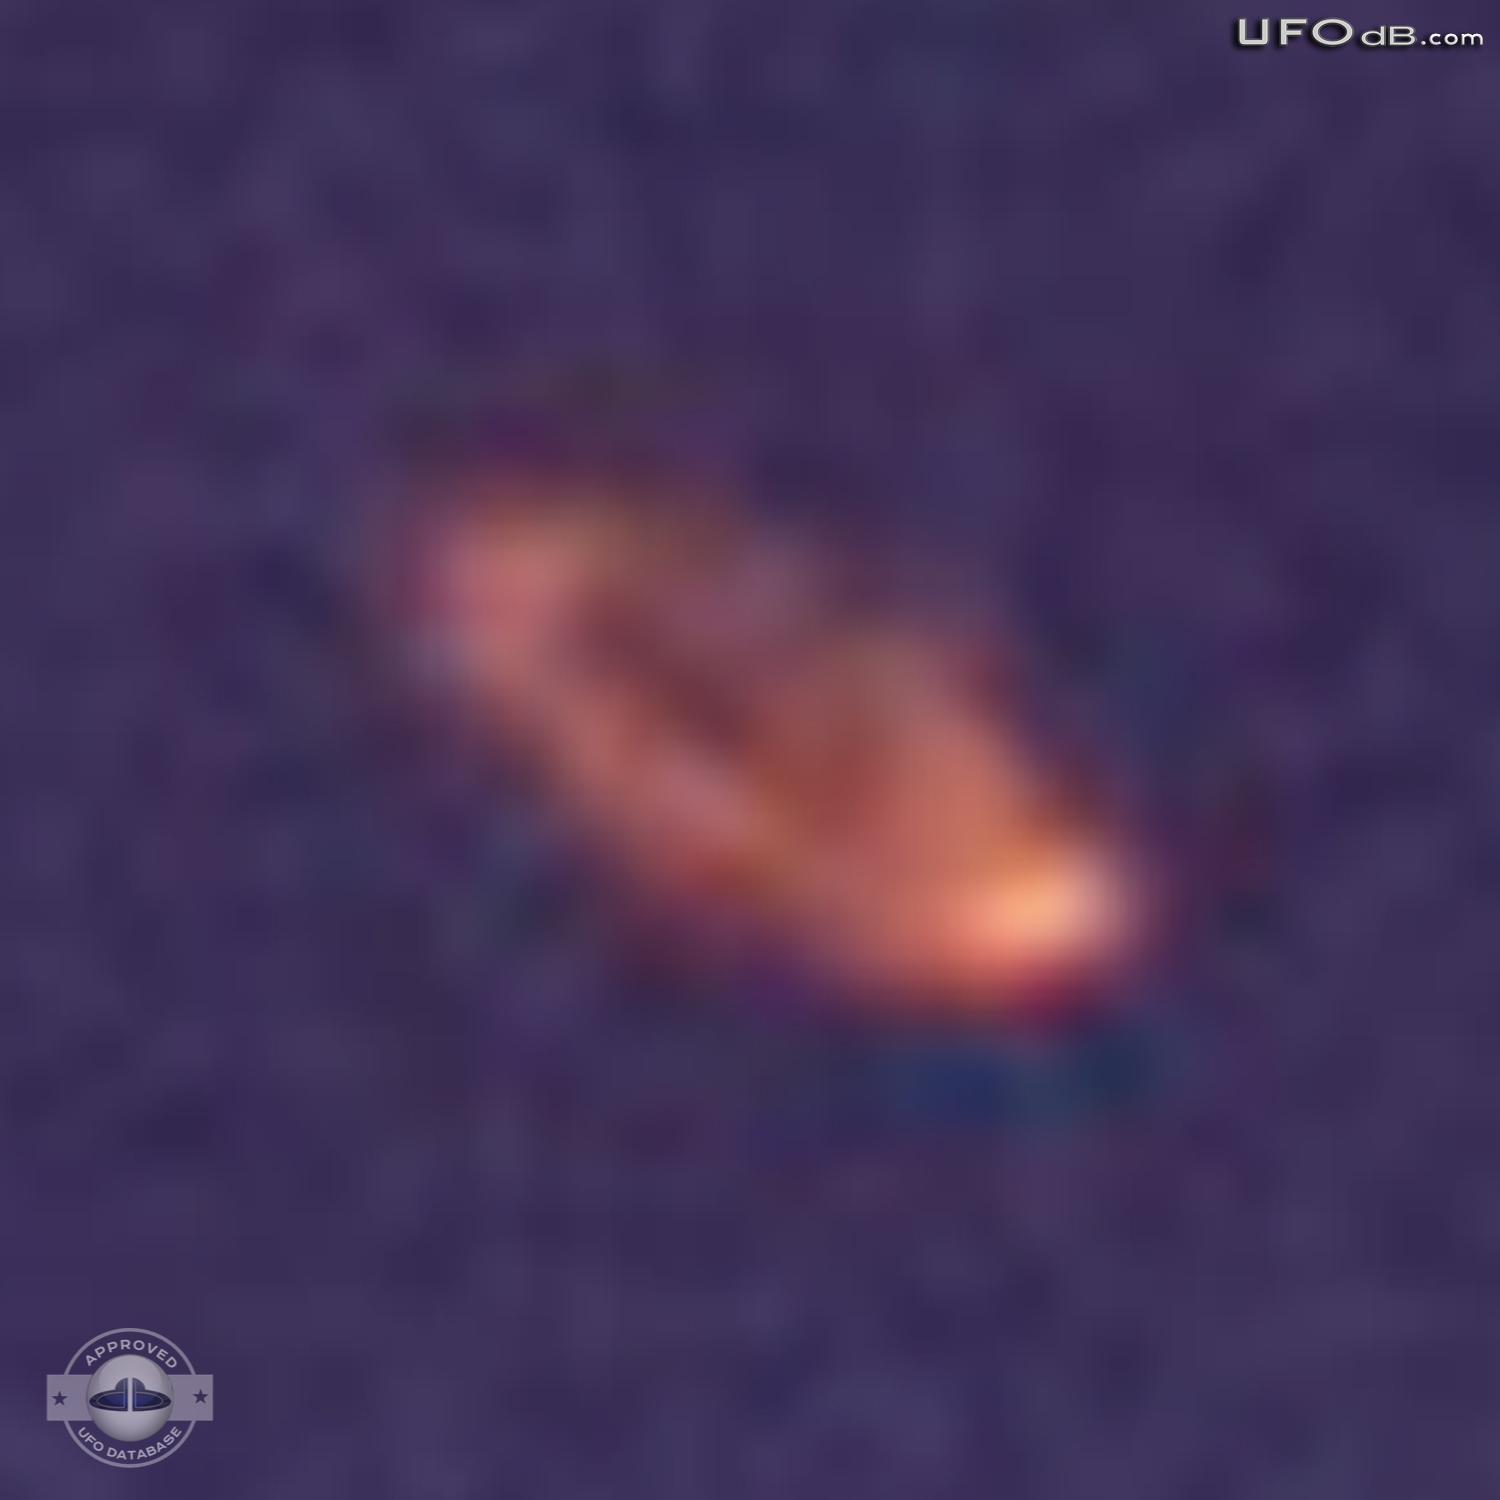 Professional photographer capture UFO near lightnings in Portugal 2010 UFO Picture #345-5